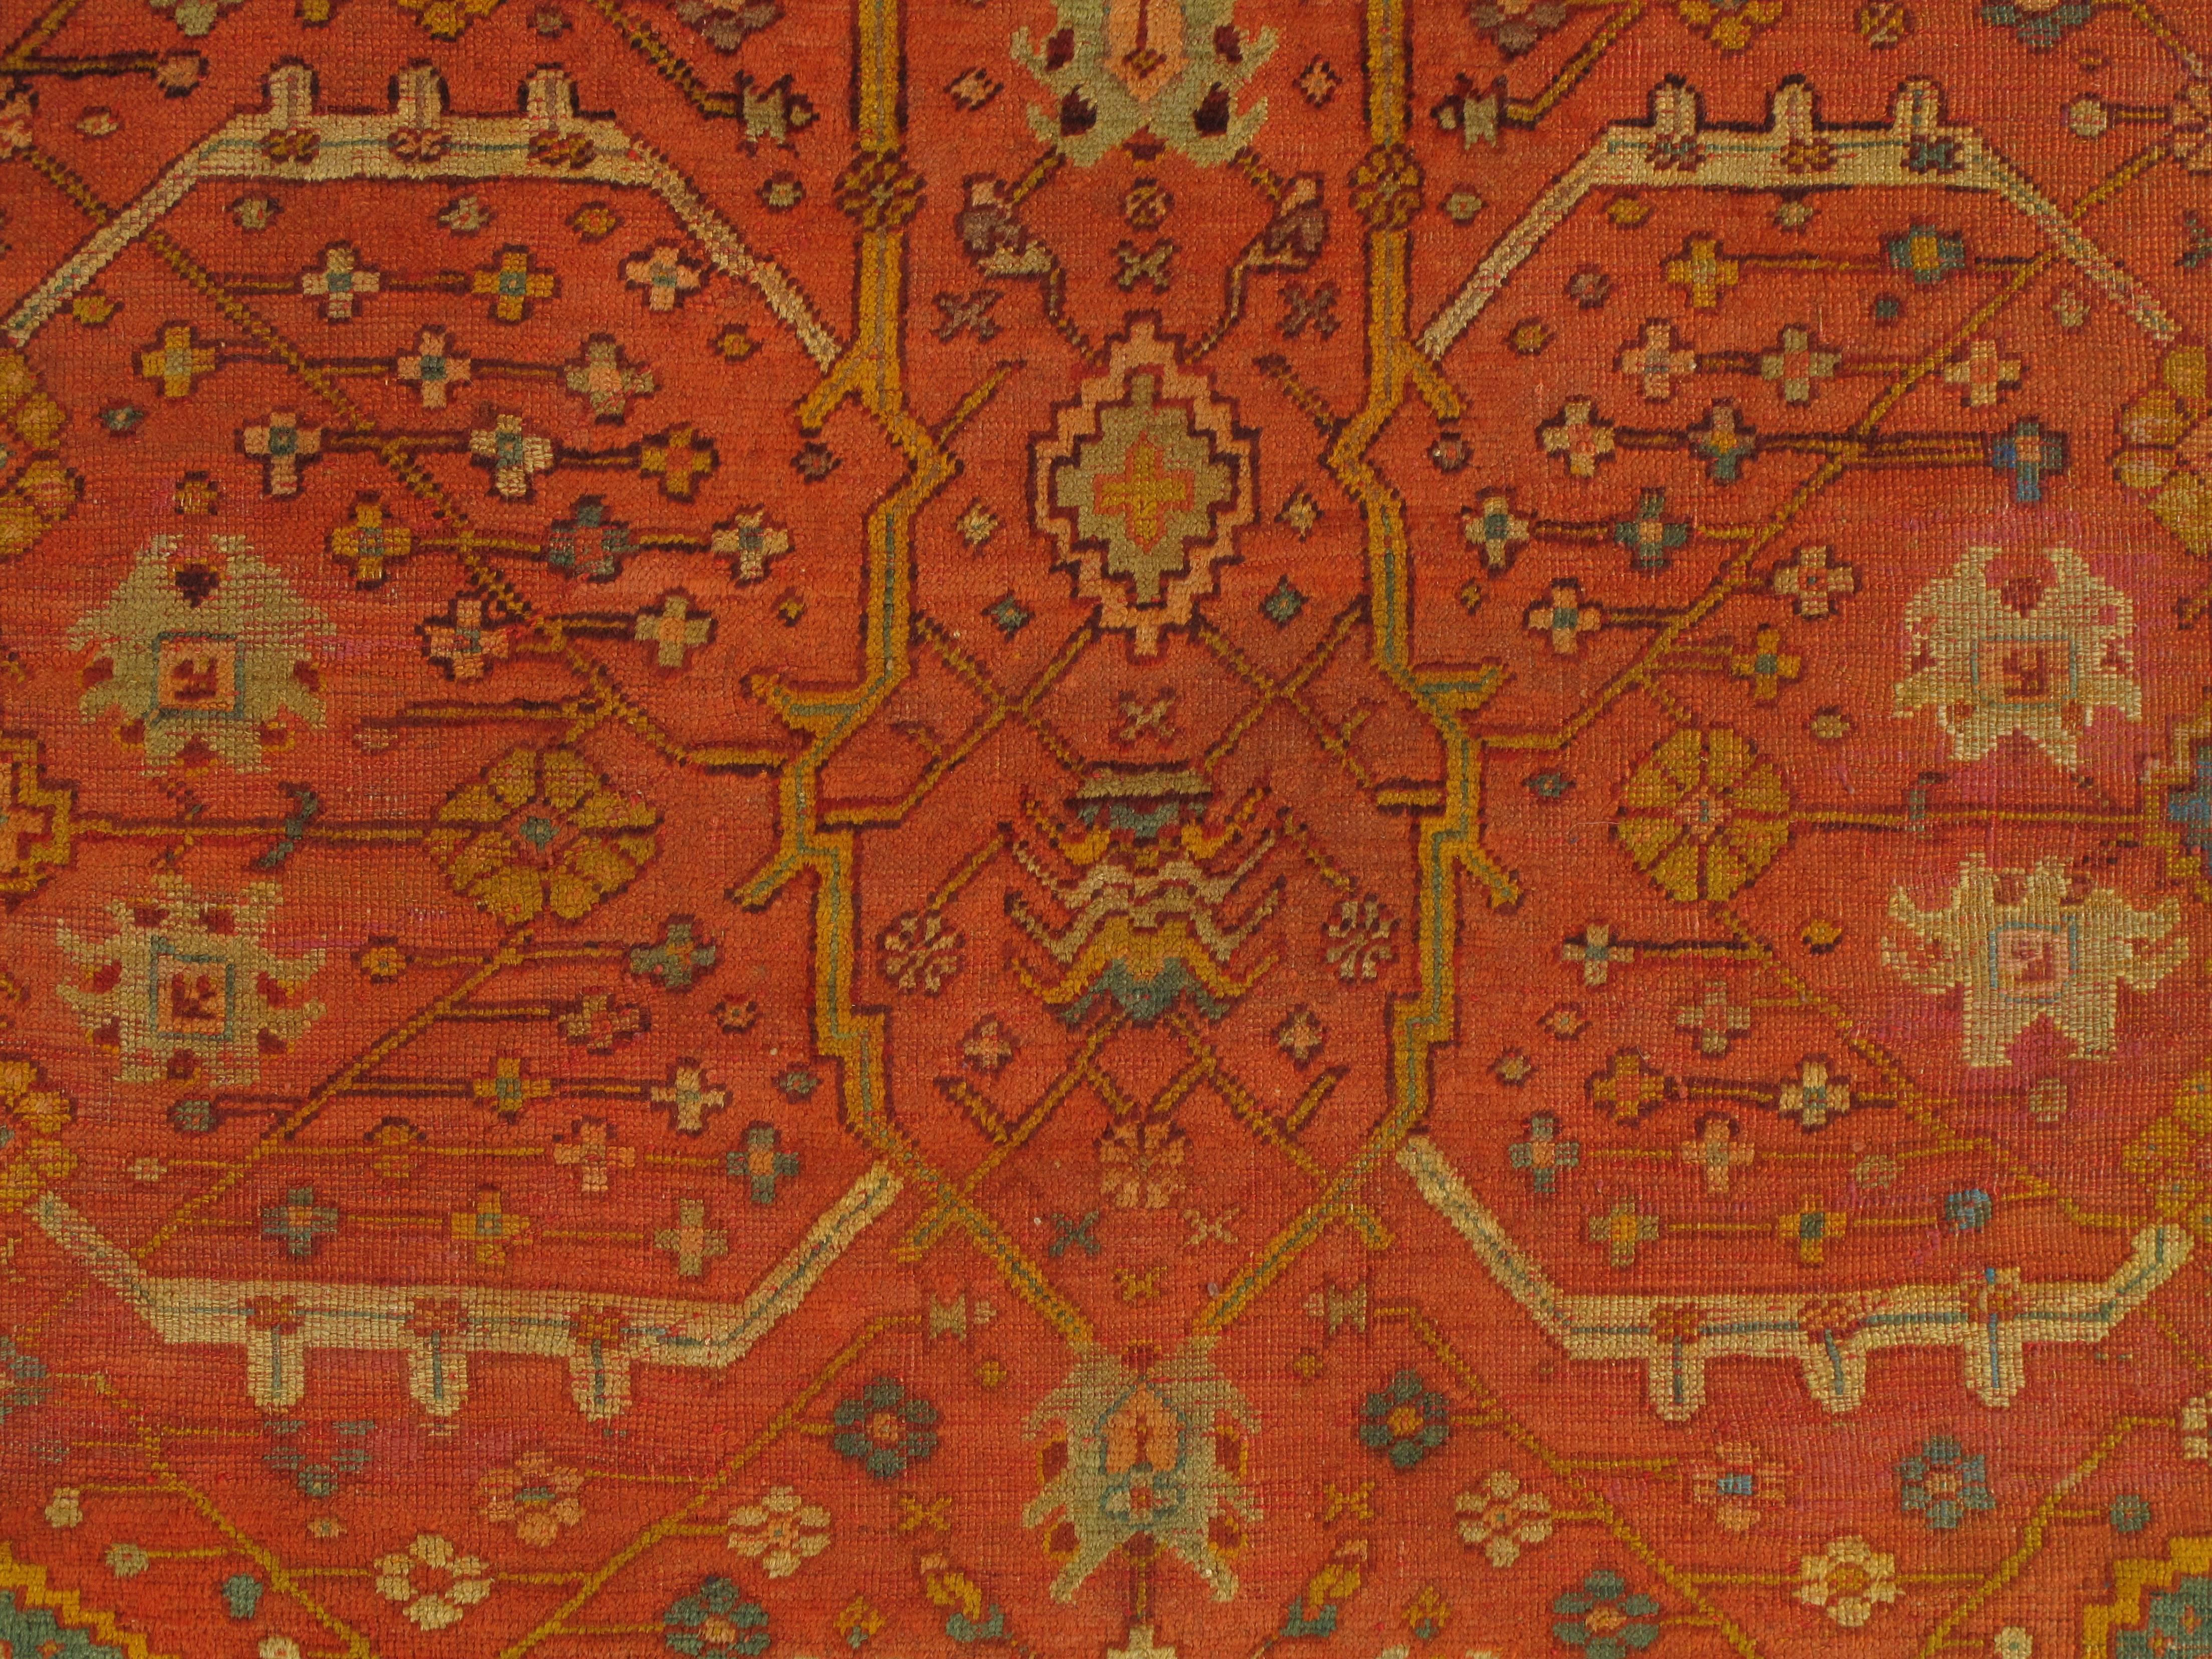 West Anatolia is one of the largest weaving regions in Turkey. Since the 15th century, Turkish rugs have always been on top of the list for having fine oriental rugs. 
Oushak rugs such as this, are desirable in today’s highly decorative market. A